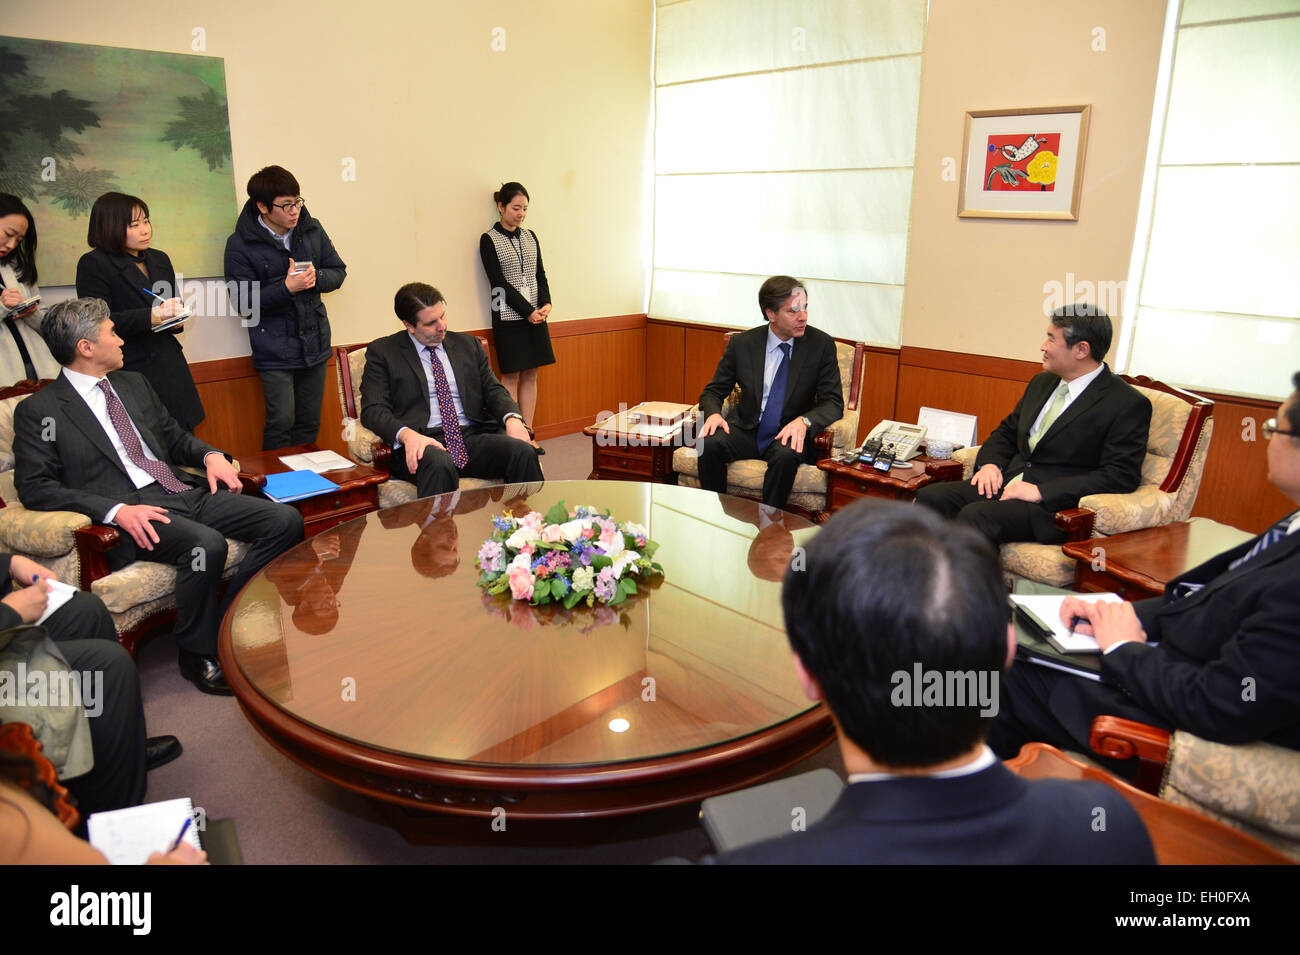 Deputy Secretary of State Antony &quot;Tony&quot; Blinken meets with First Vice Minister of Foreign Affairs Cho Tae-yong at the Korean Ministry of Foreign Affairs in Seoul, South Korea, on February 9, 2015. Stock Photo